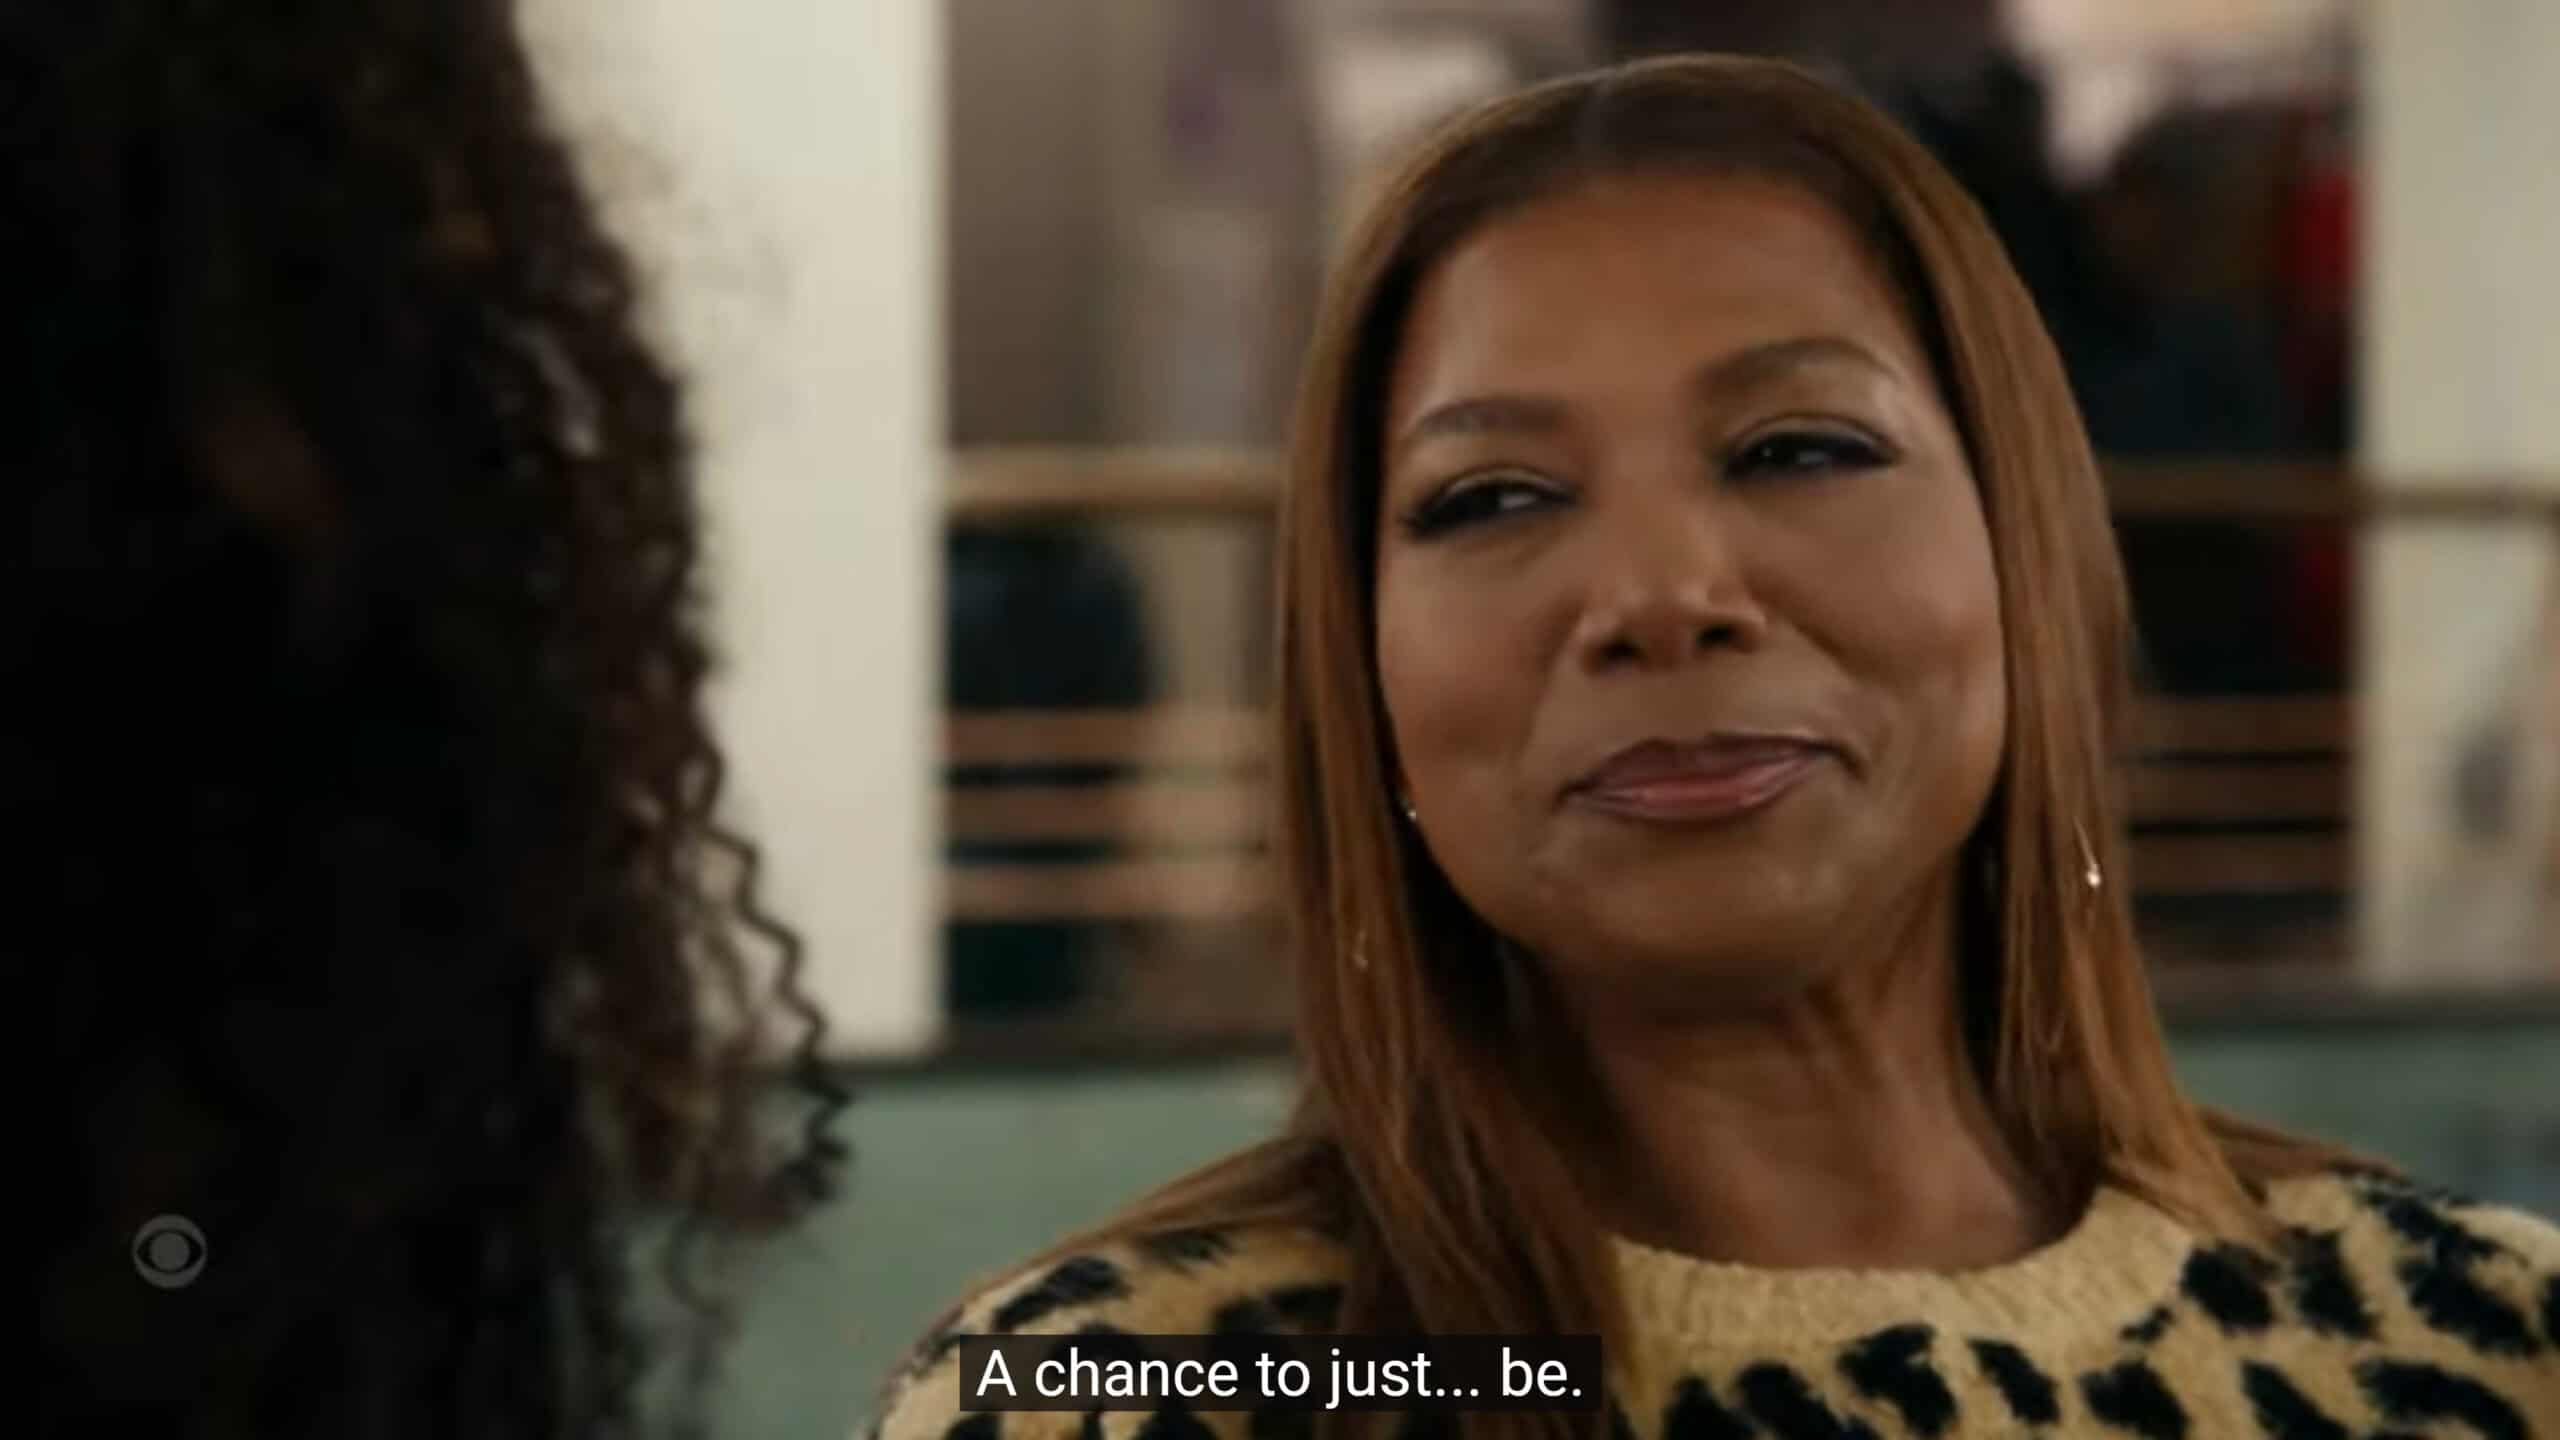 Queen Latifah as Robyn noting she wished she had a chance to just be